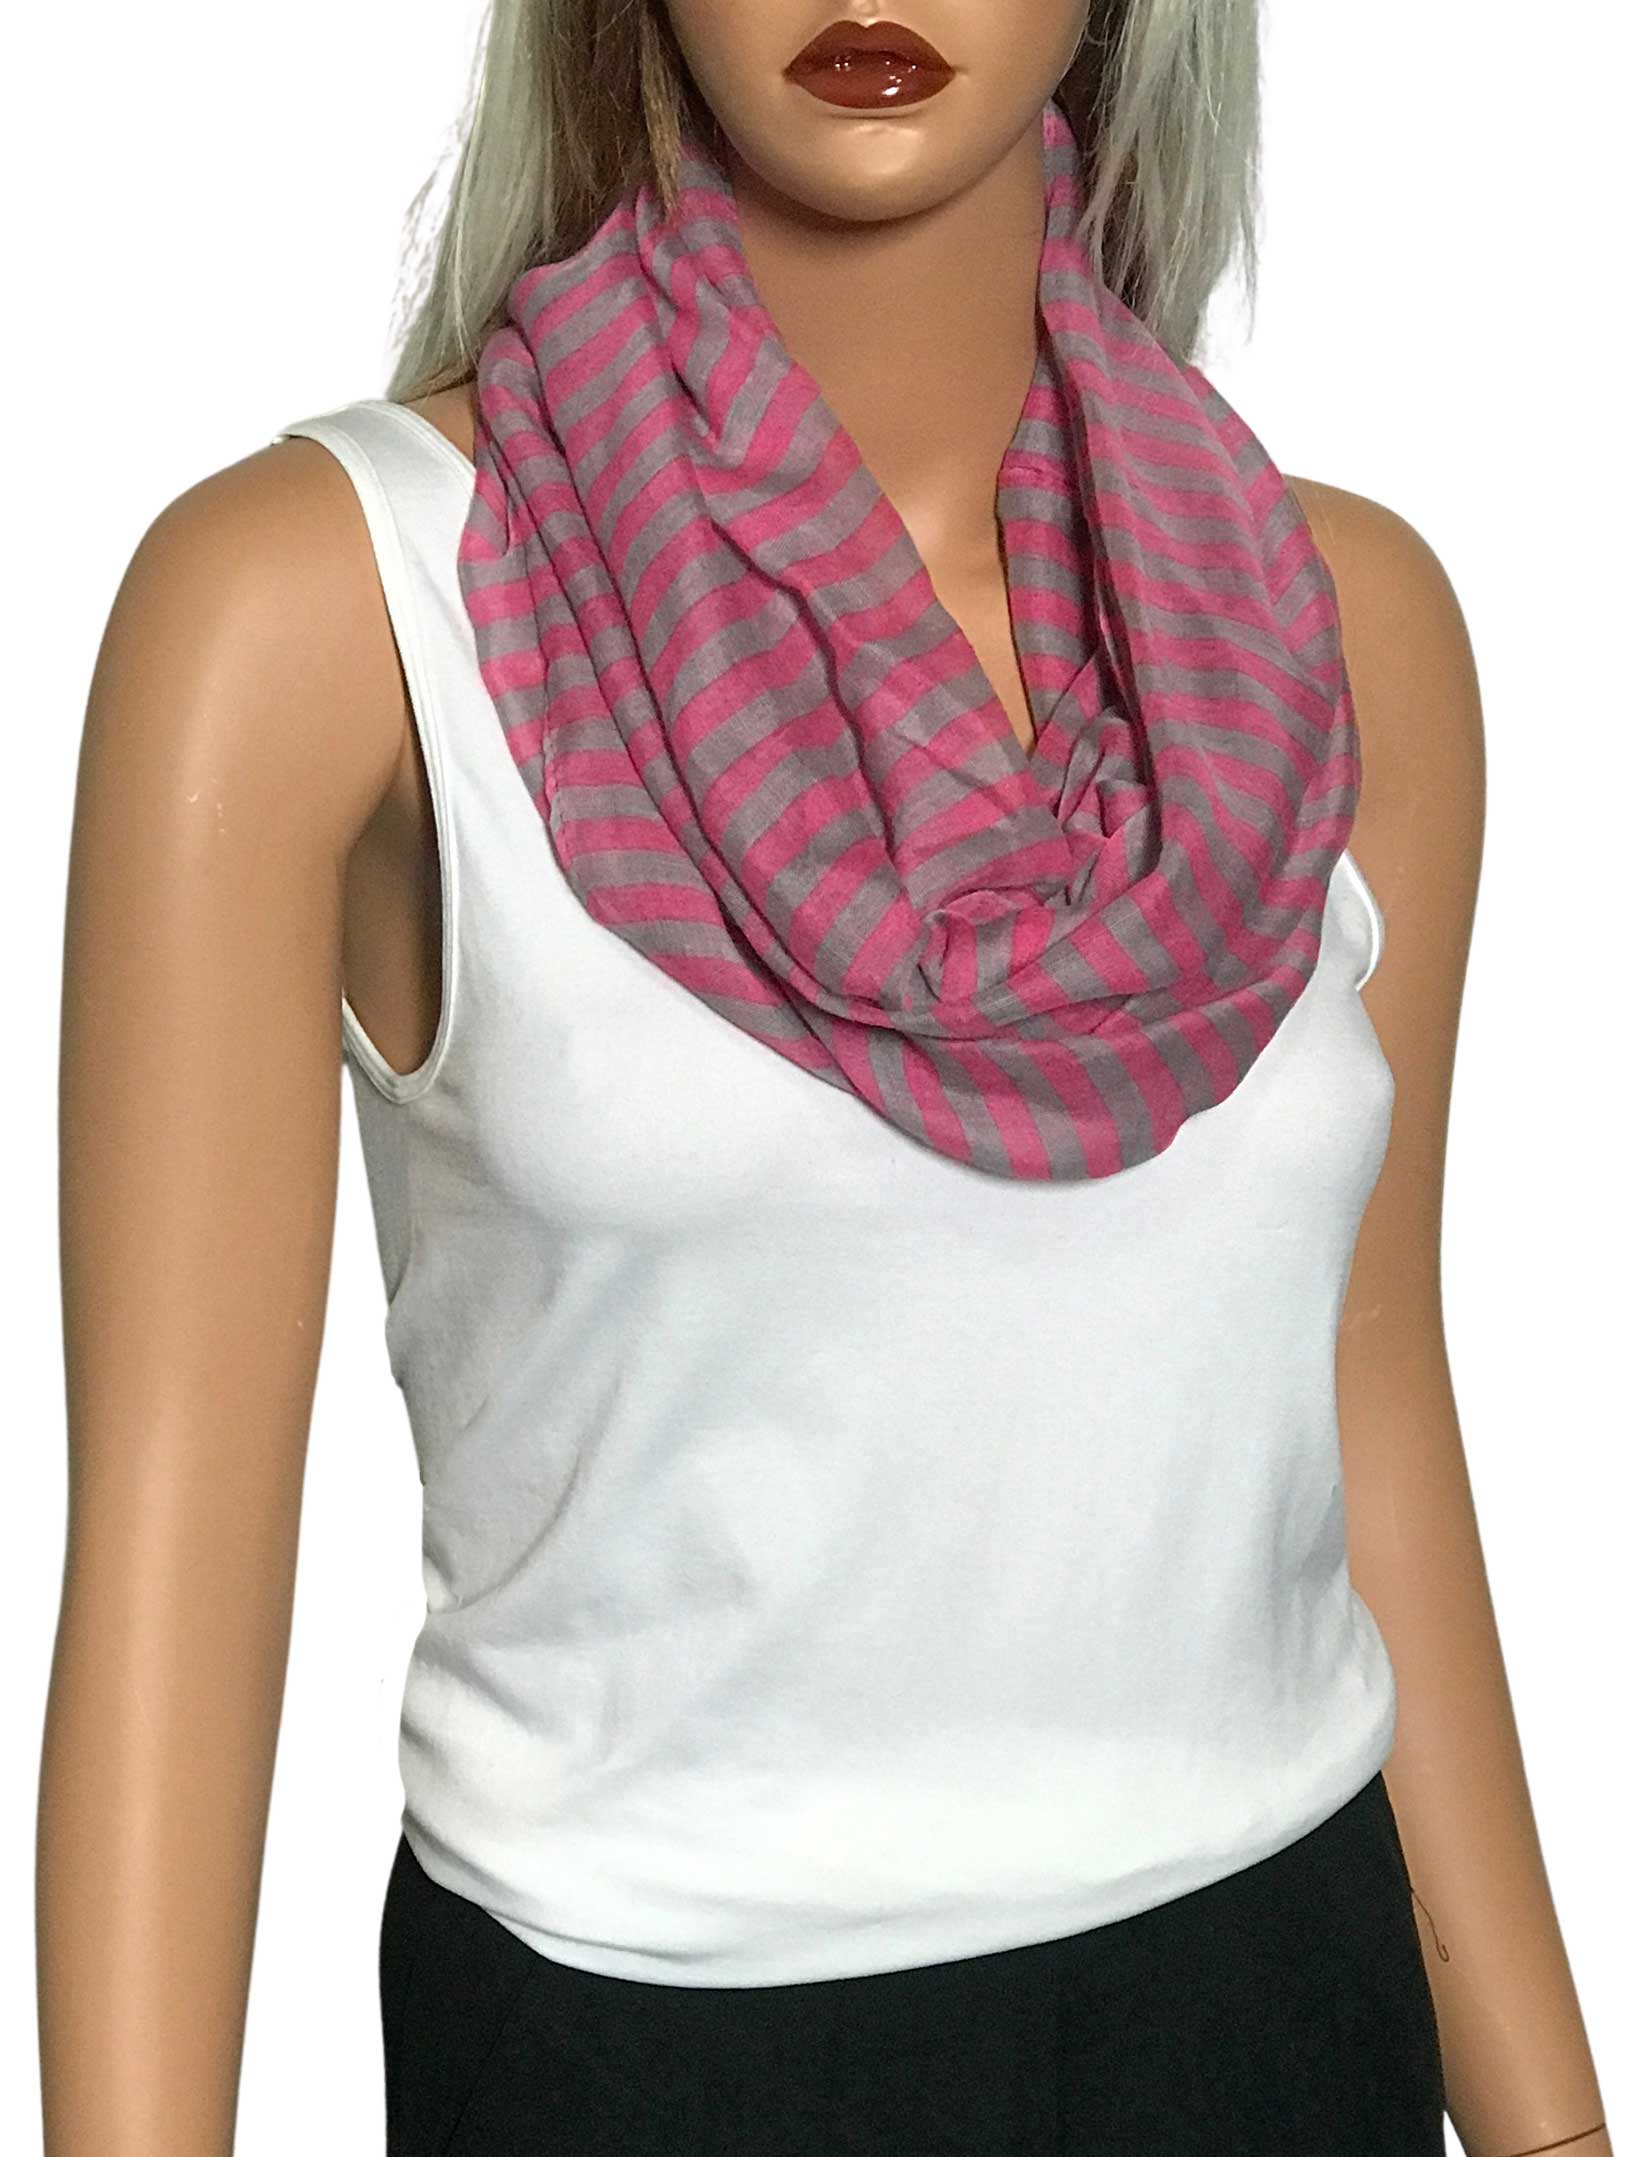 wholesale 3329 - Striped Infinity Scarves